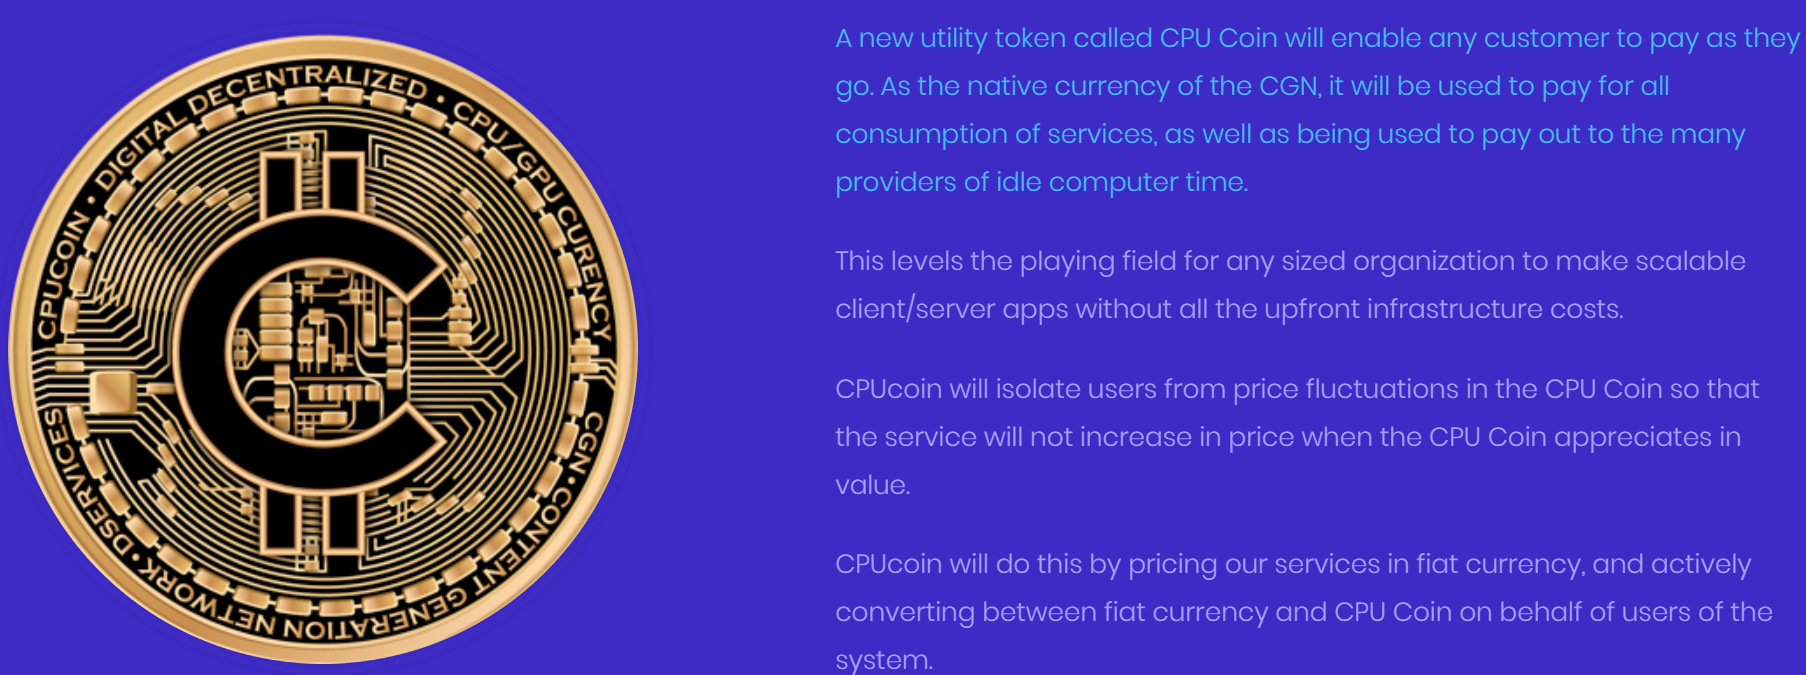 cpucoin_image.PNG